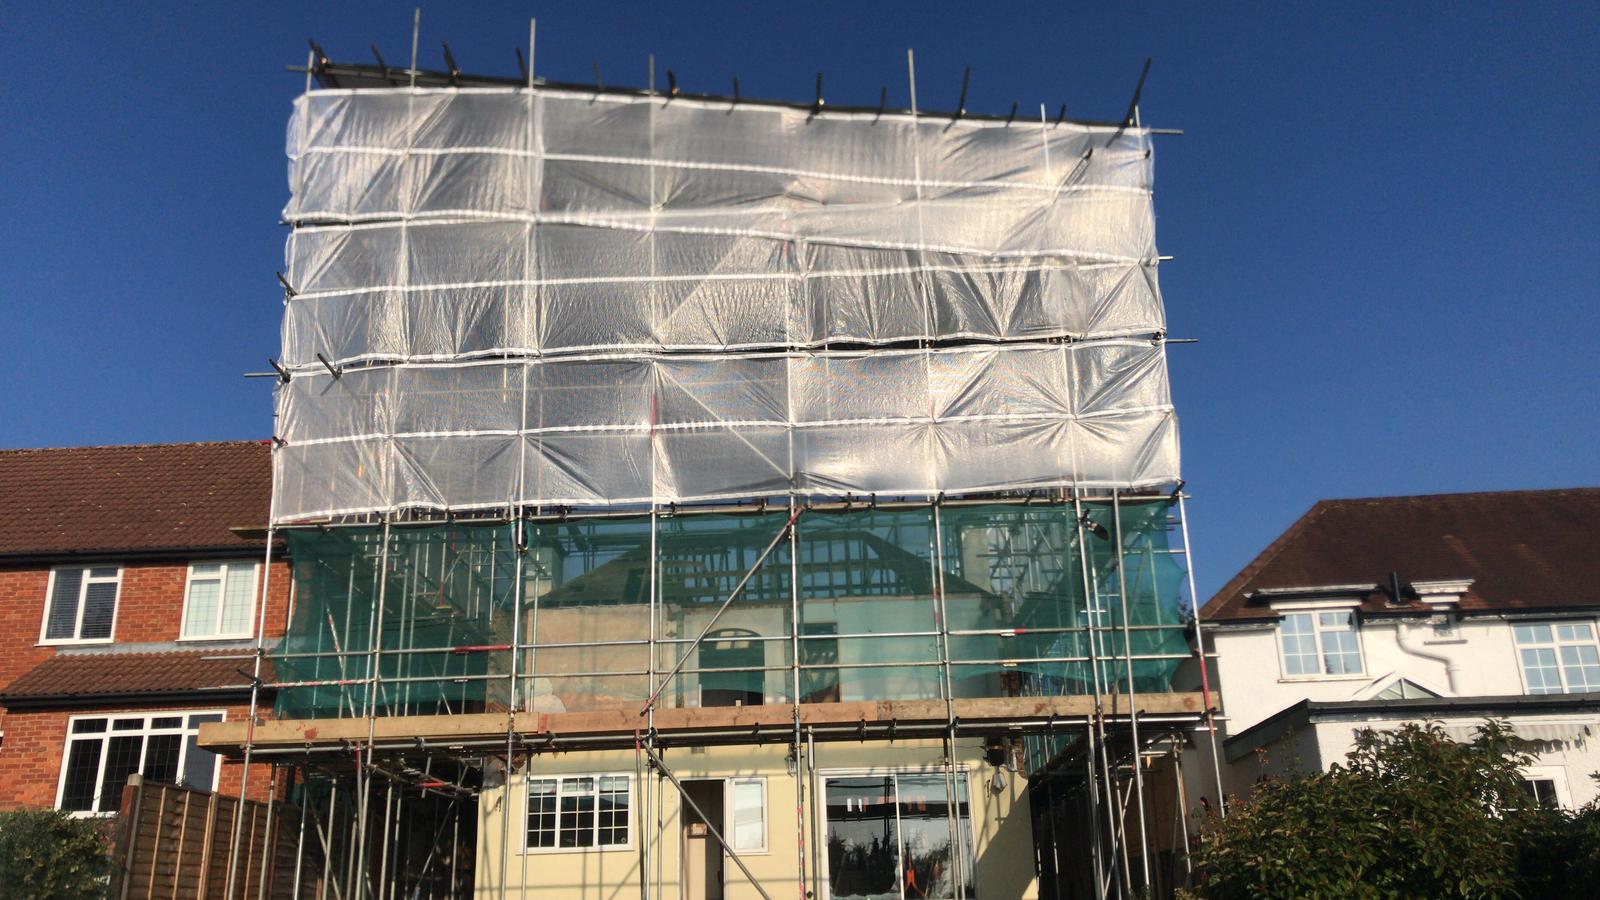 Bedfordshire Scaffolding Services